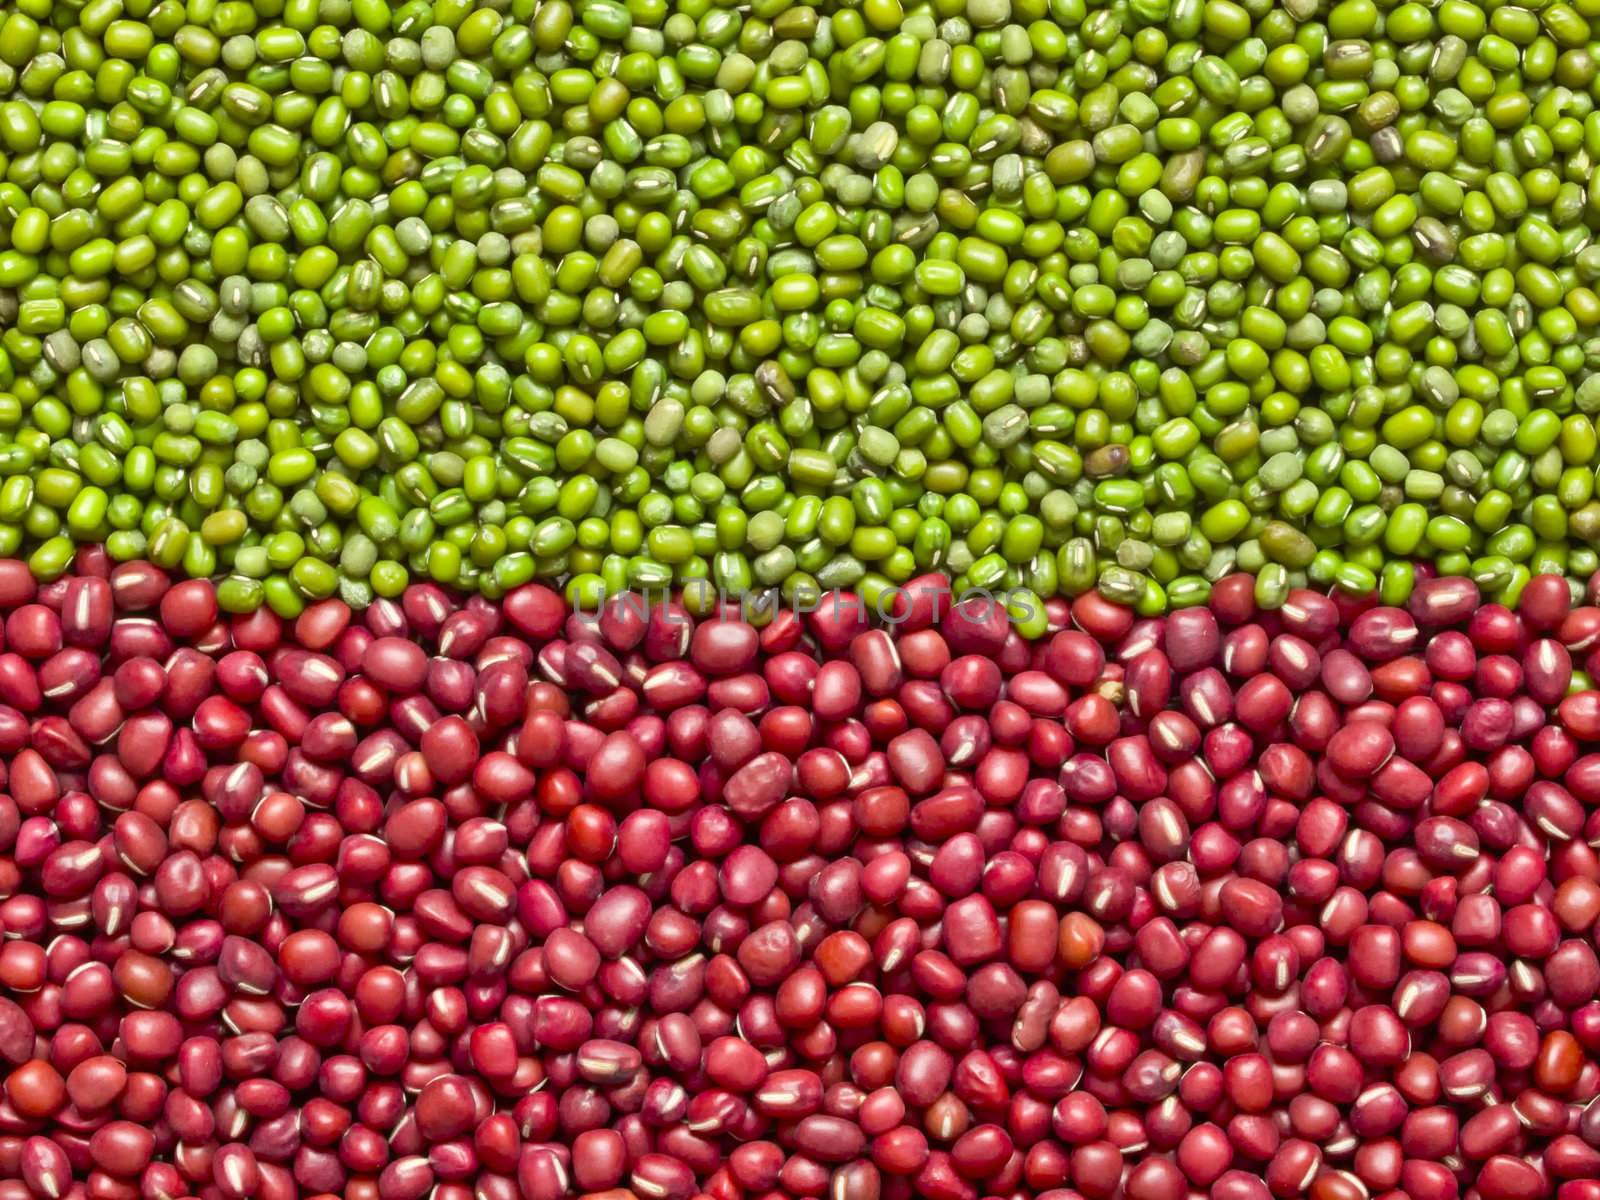 red and green mung beans by zkruger